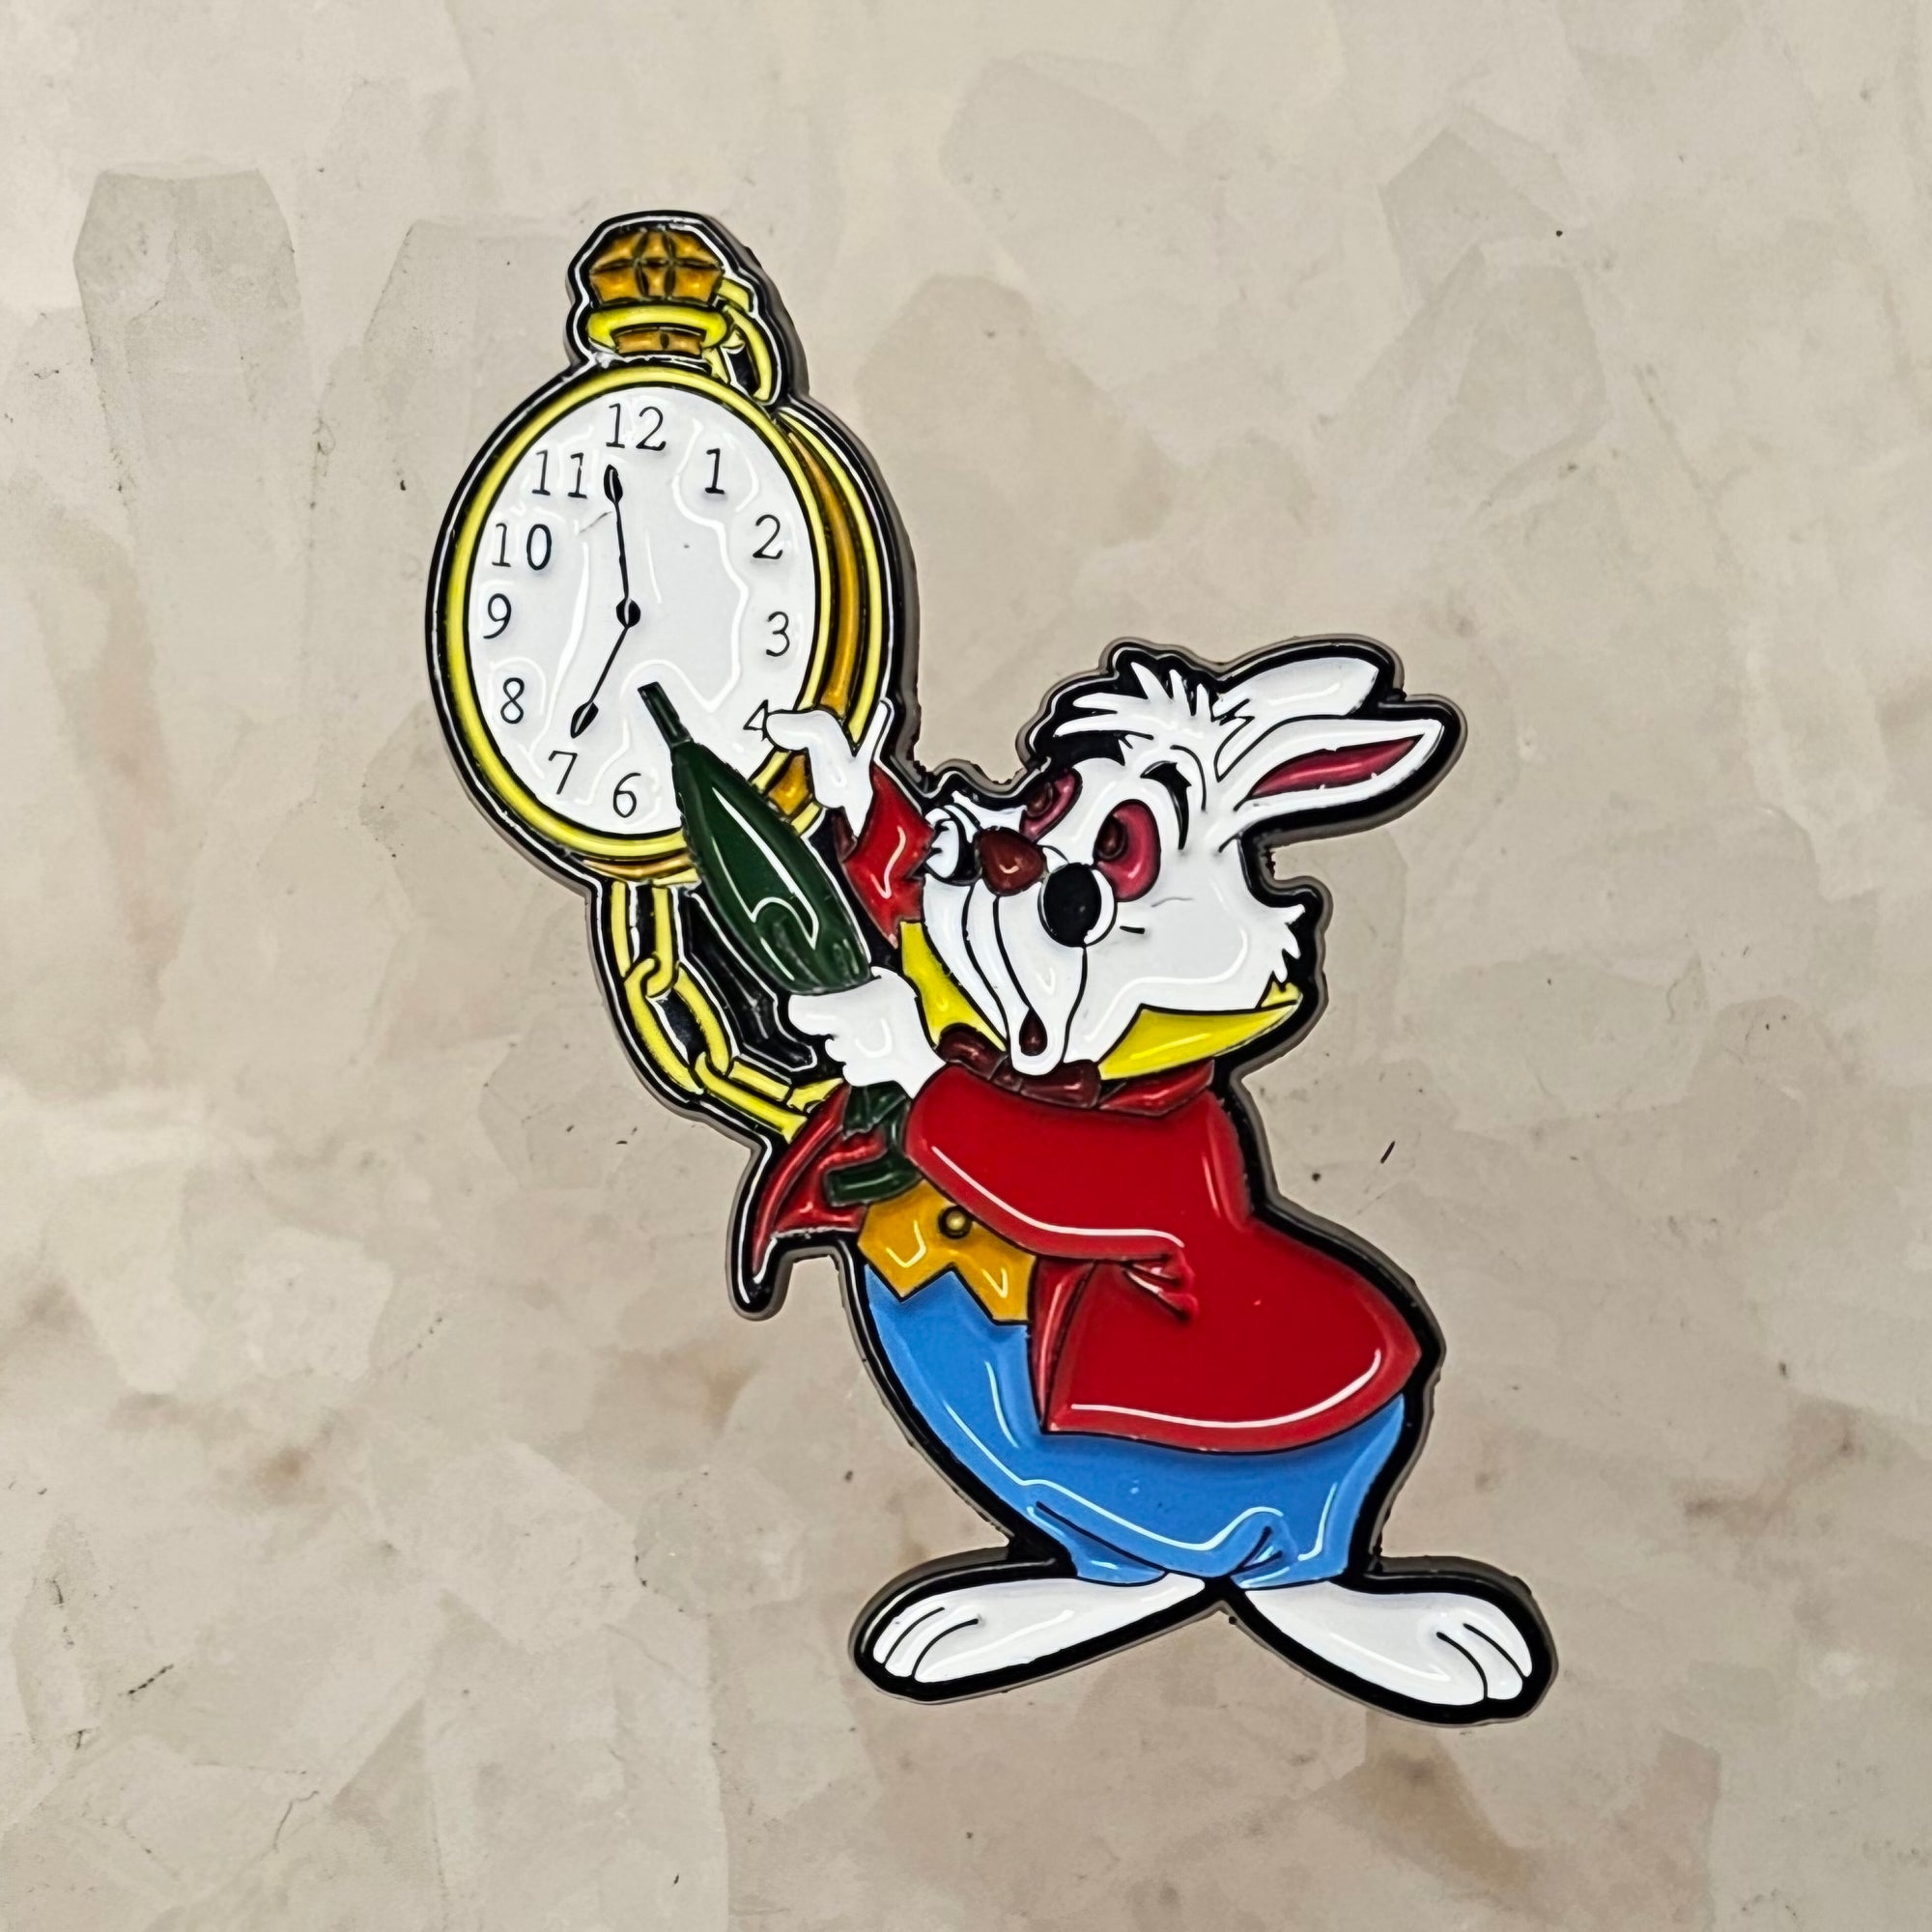 Alice Out Of Time White Rabbit In Wonderland Enamel Pins Hat Pins Lapel Pin Brooch Badge Festival Pin